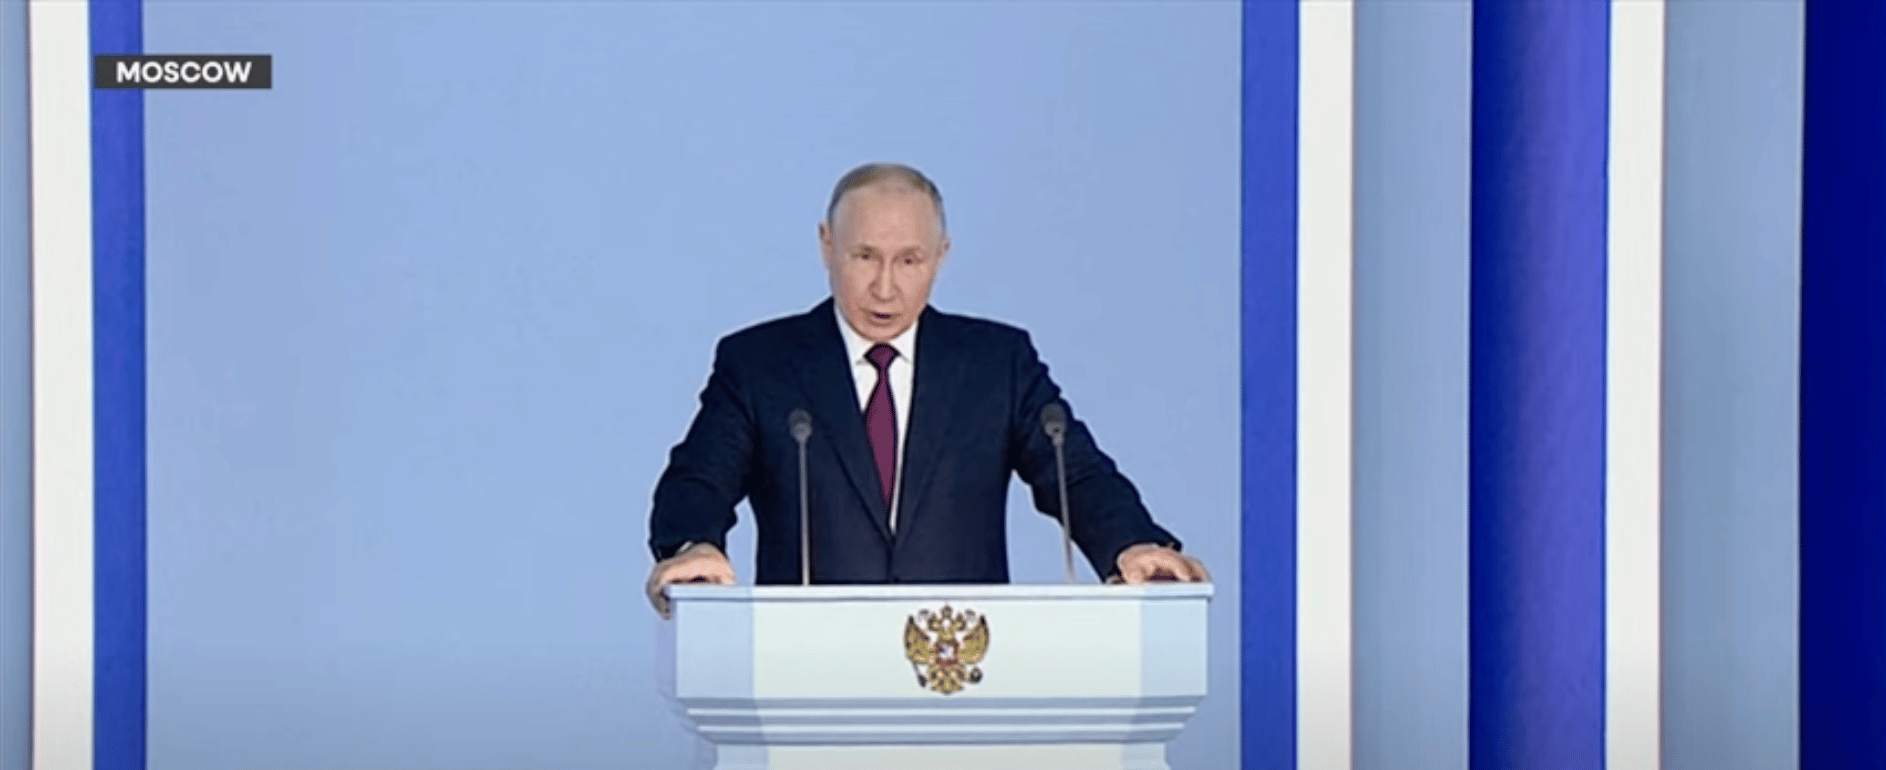 Putin warns of ‘Global War’ and makes veiled nuclear threat in latest speech